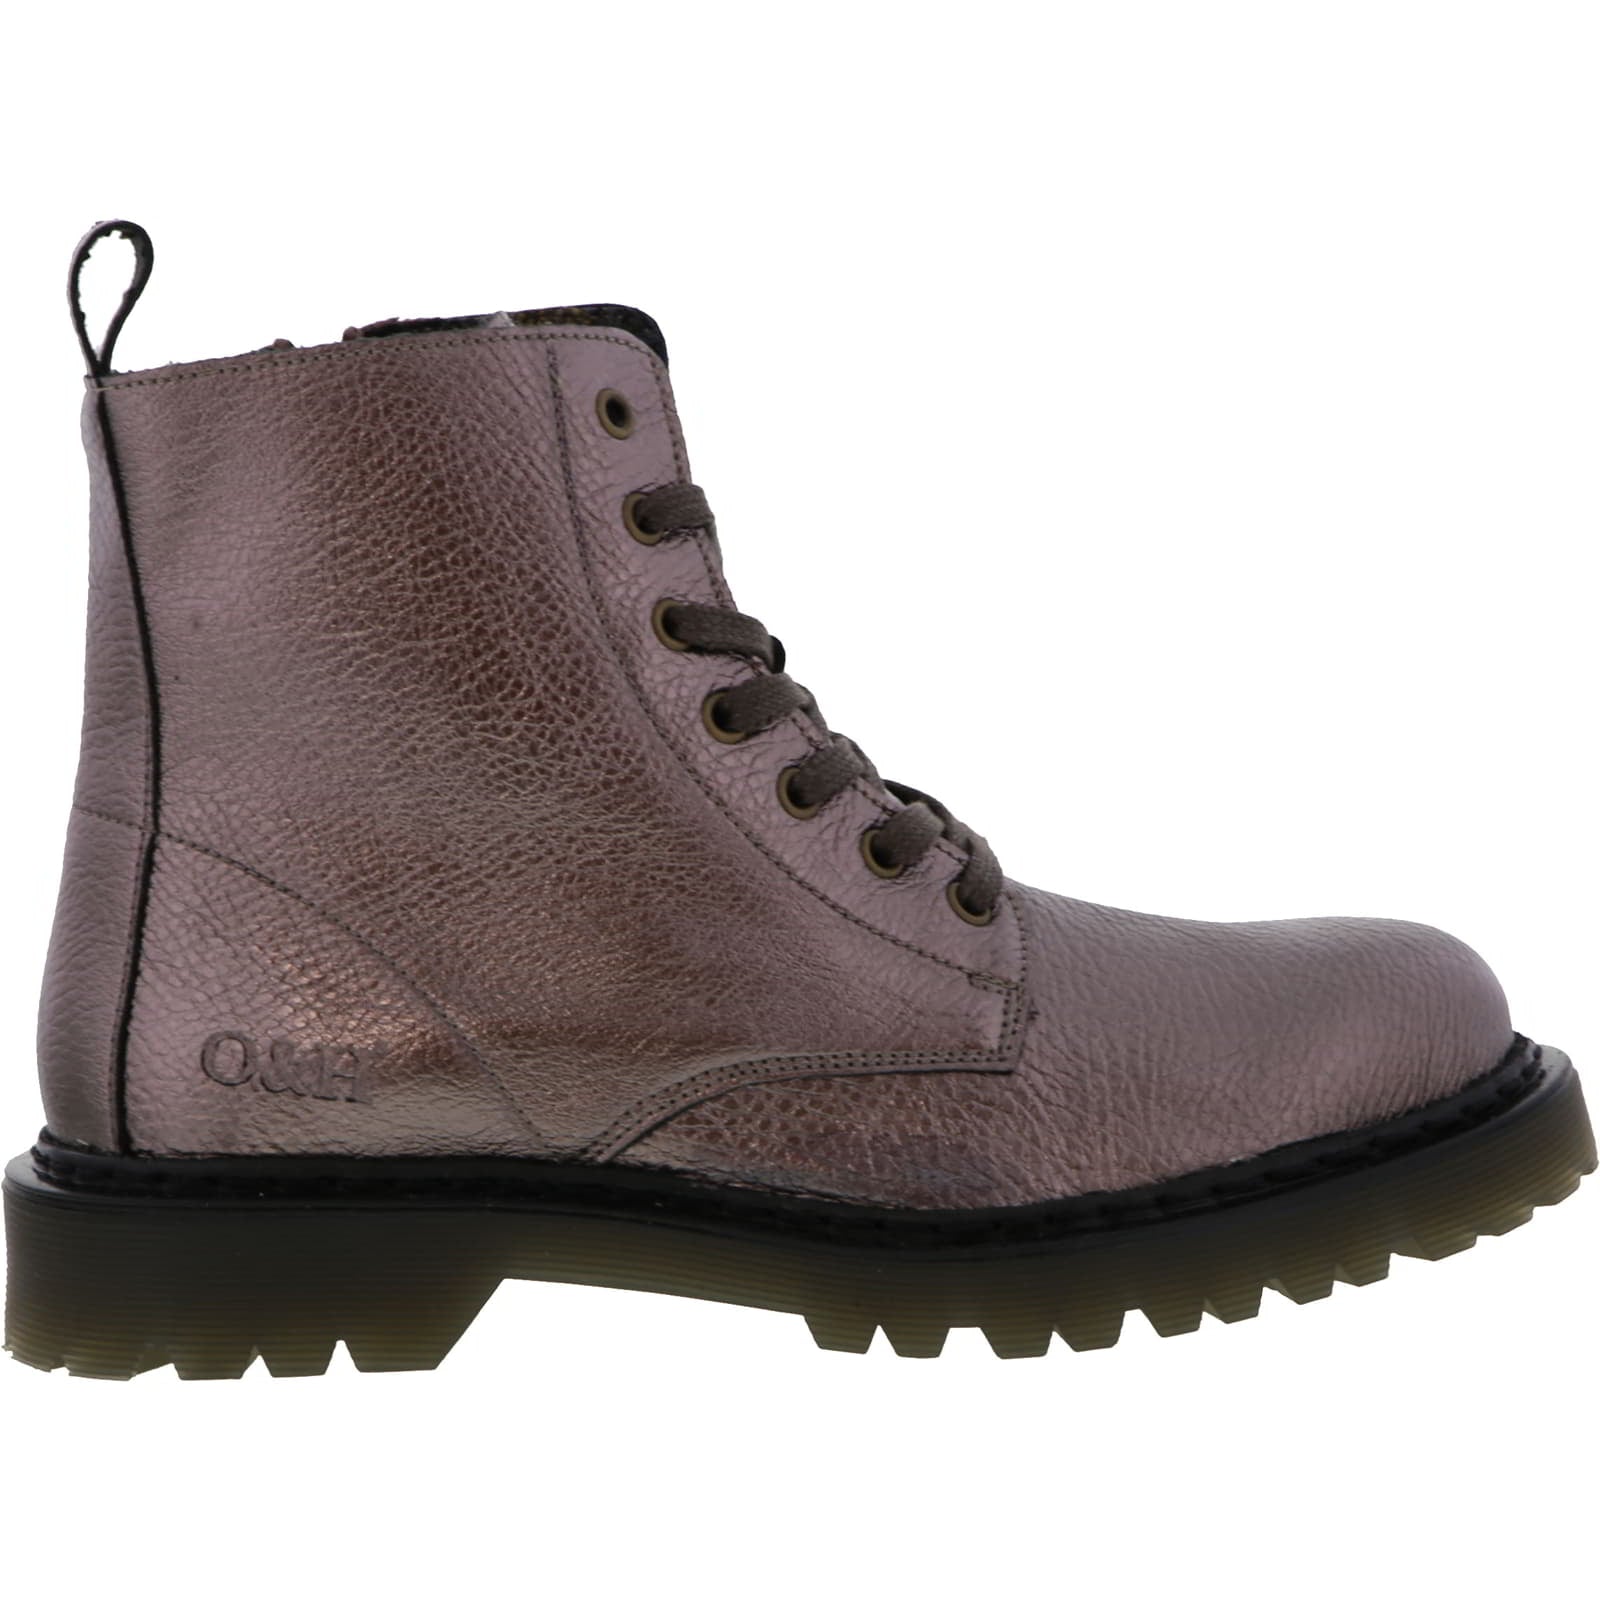 Womens Brixton 7 Leather Ankle Boots - Gratio